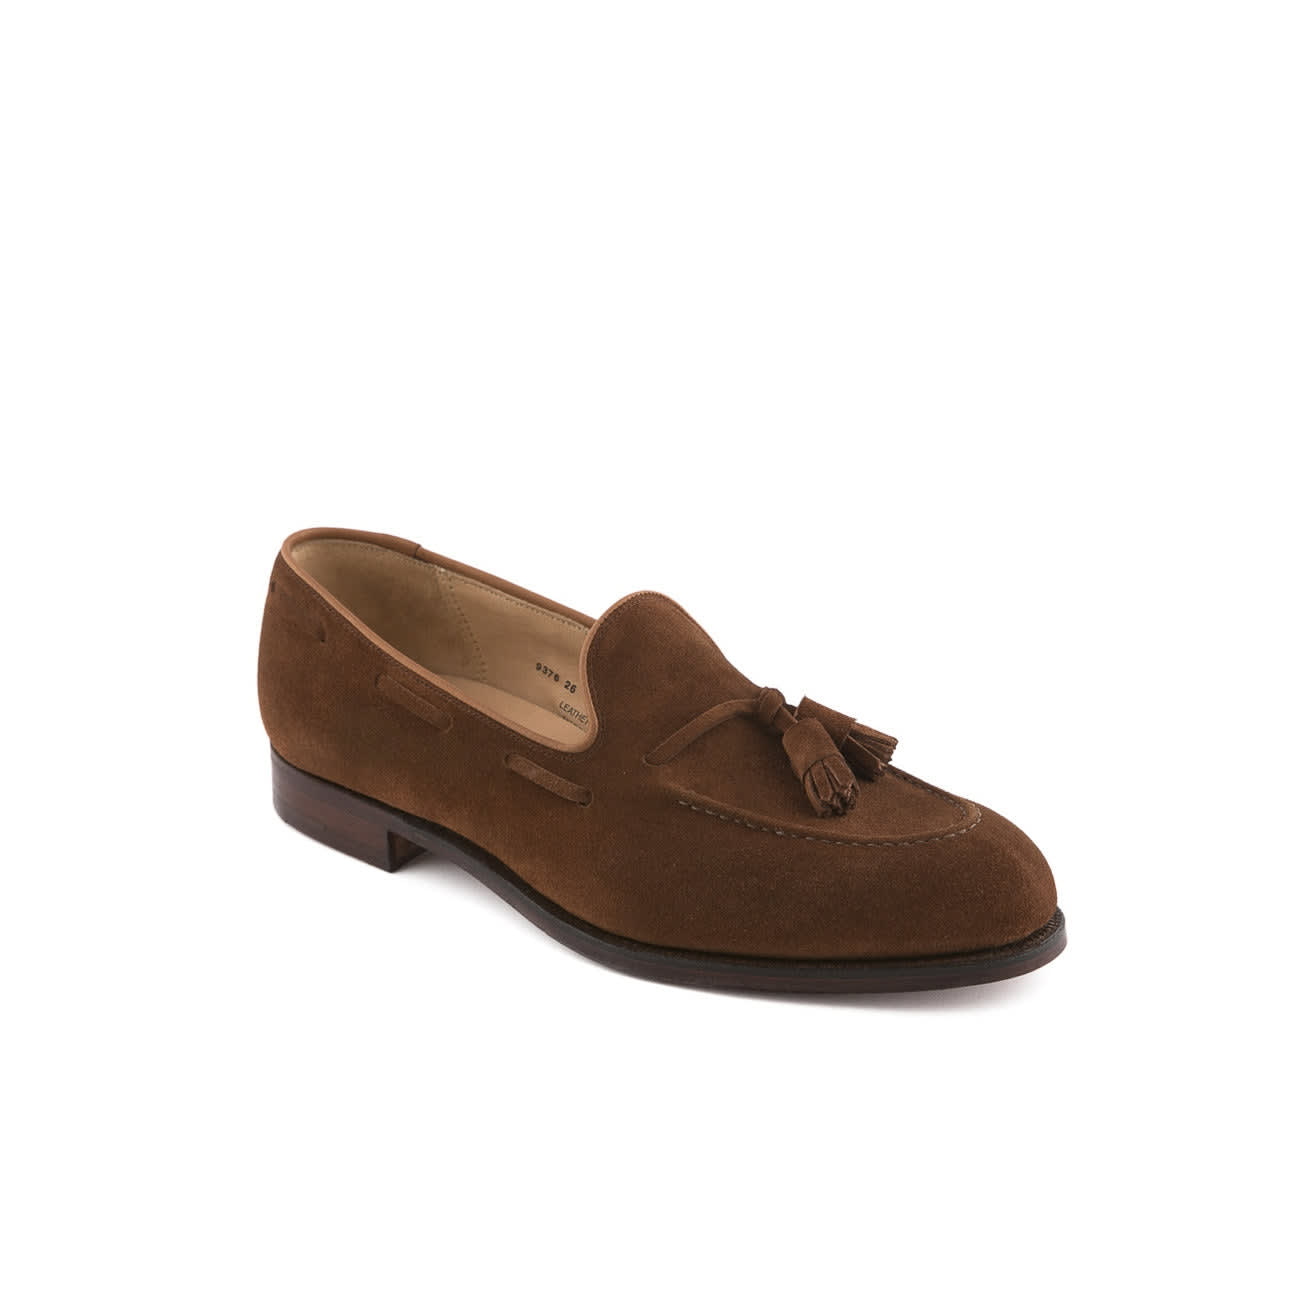 Cavendish 2 Polo Brown Suede Tassel Loafer